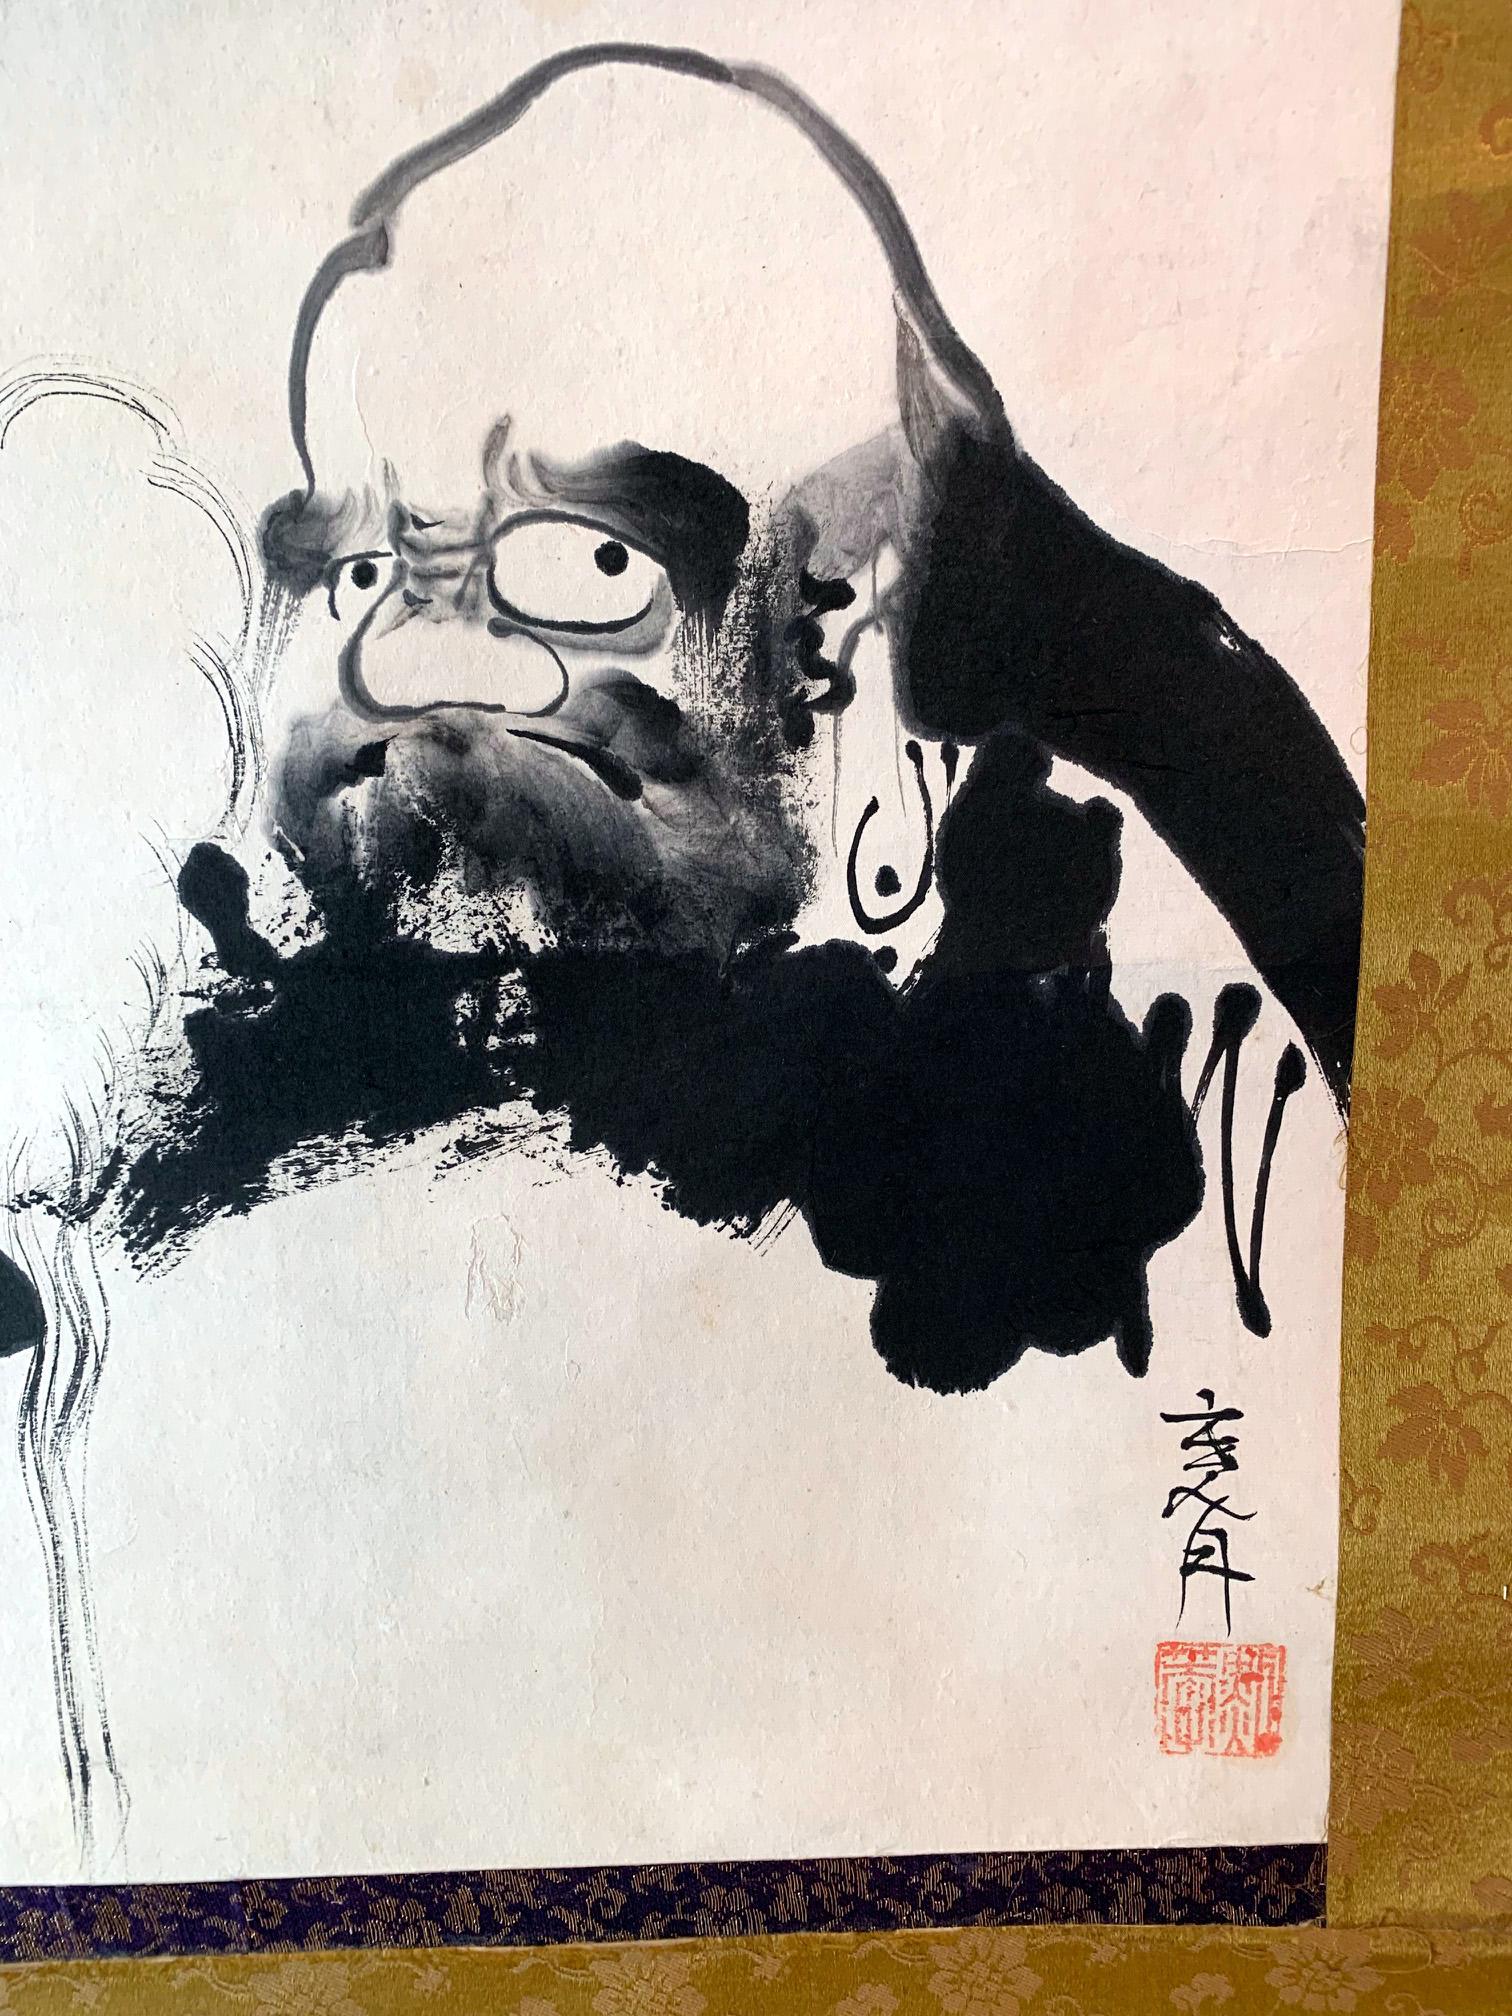 Sumi ink on paper, mounted with brocade borders as a kakejiku (hanging scroll), the painting depicts Daruma, the historical Bodhidharma, who reputedly brought Chan Buddhism to China at the beginning of the 6th century. The Chan further spread to